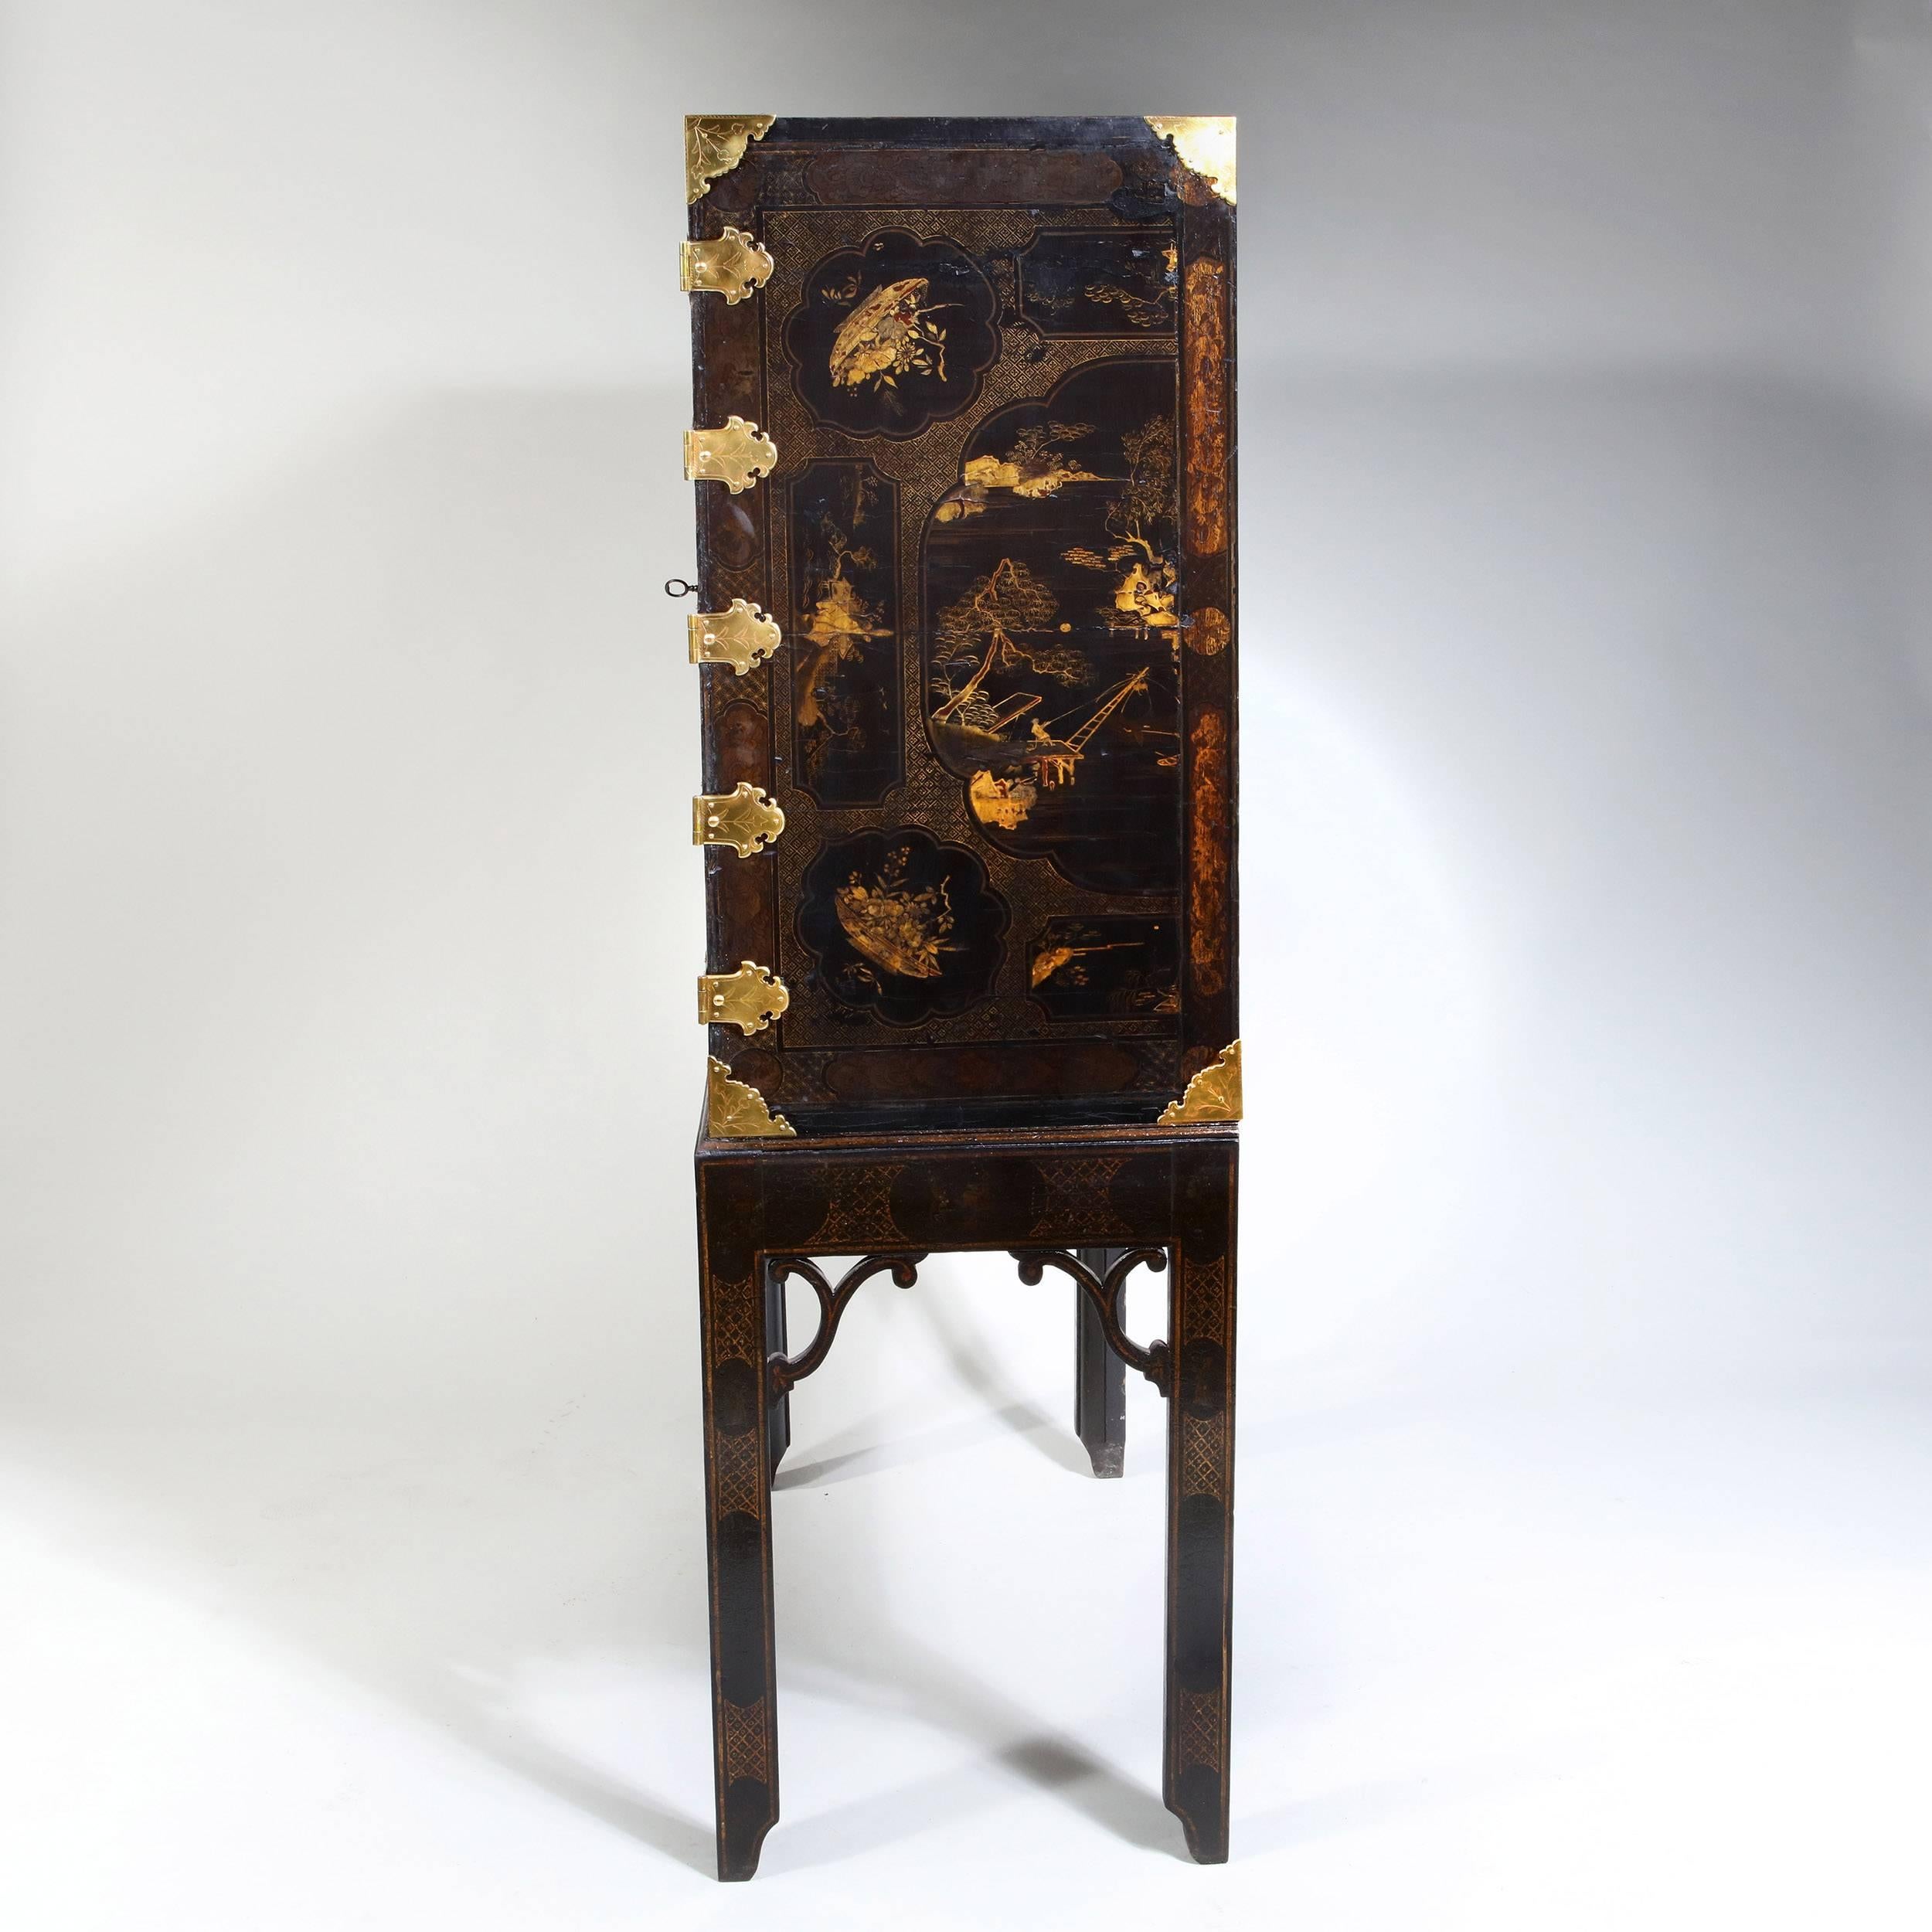 A George III chinoiserie cabinet on stand made using panels of 17th century Japanese lacquer and formed in the traditional manner. Standing on its original japanned Stand, throughout the lacquer is worn but in good condition,

England, circa 1780.